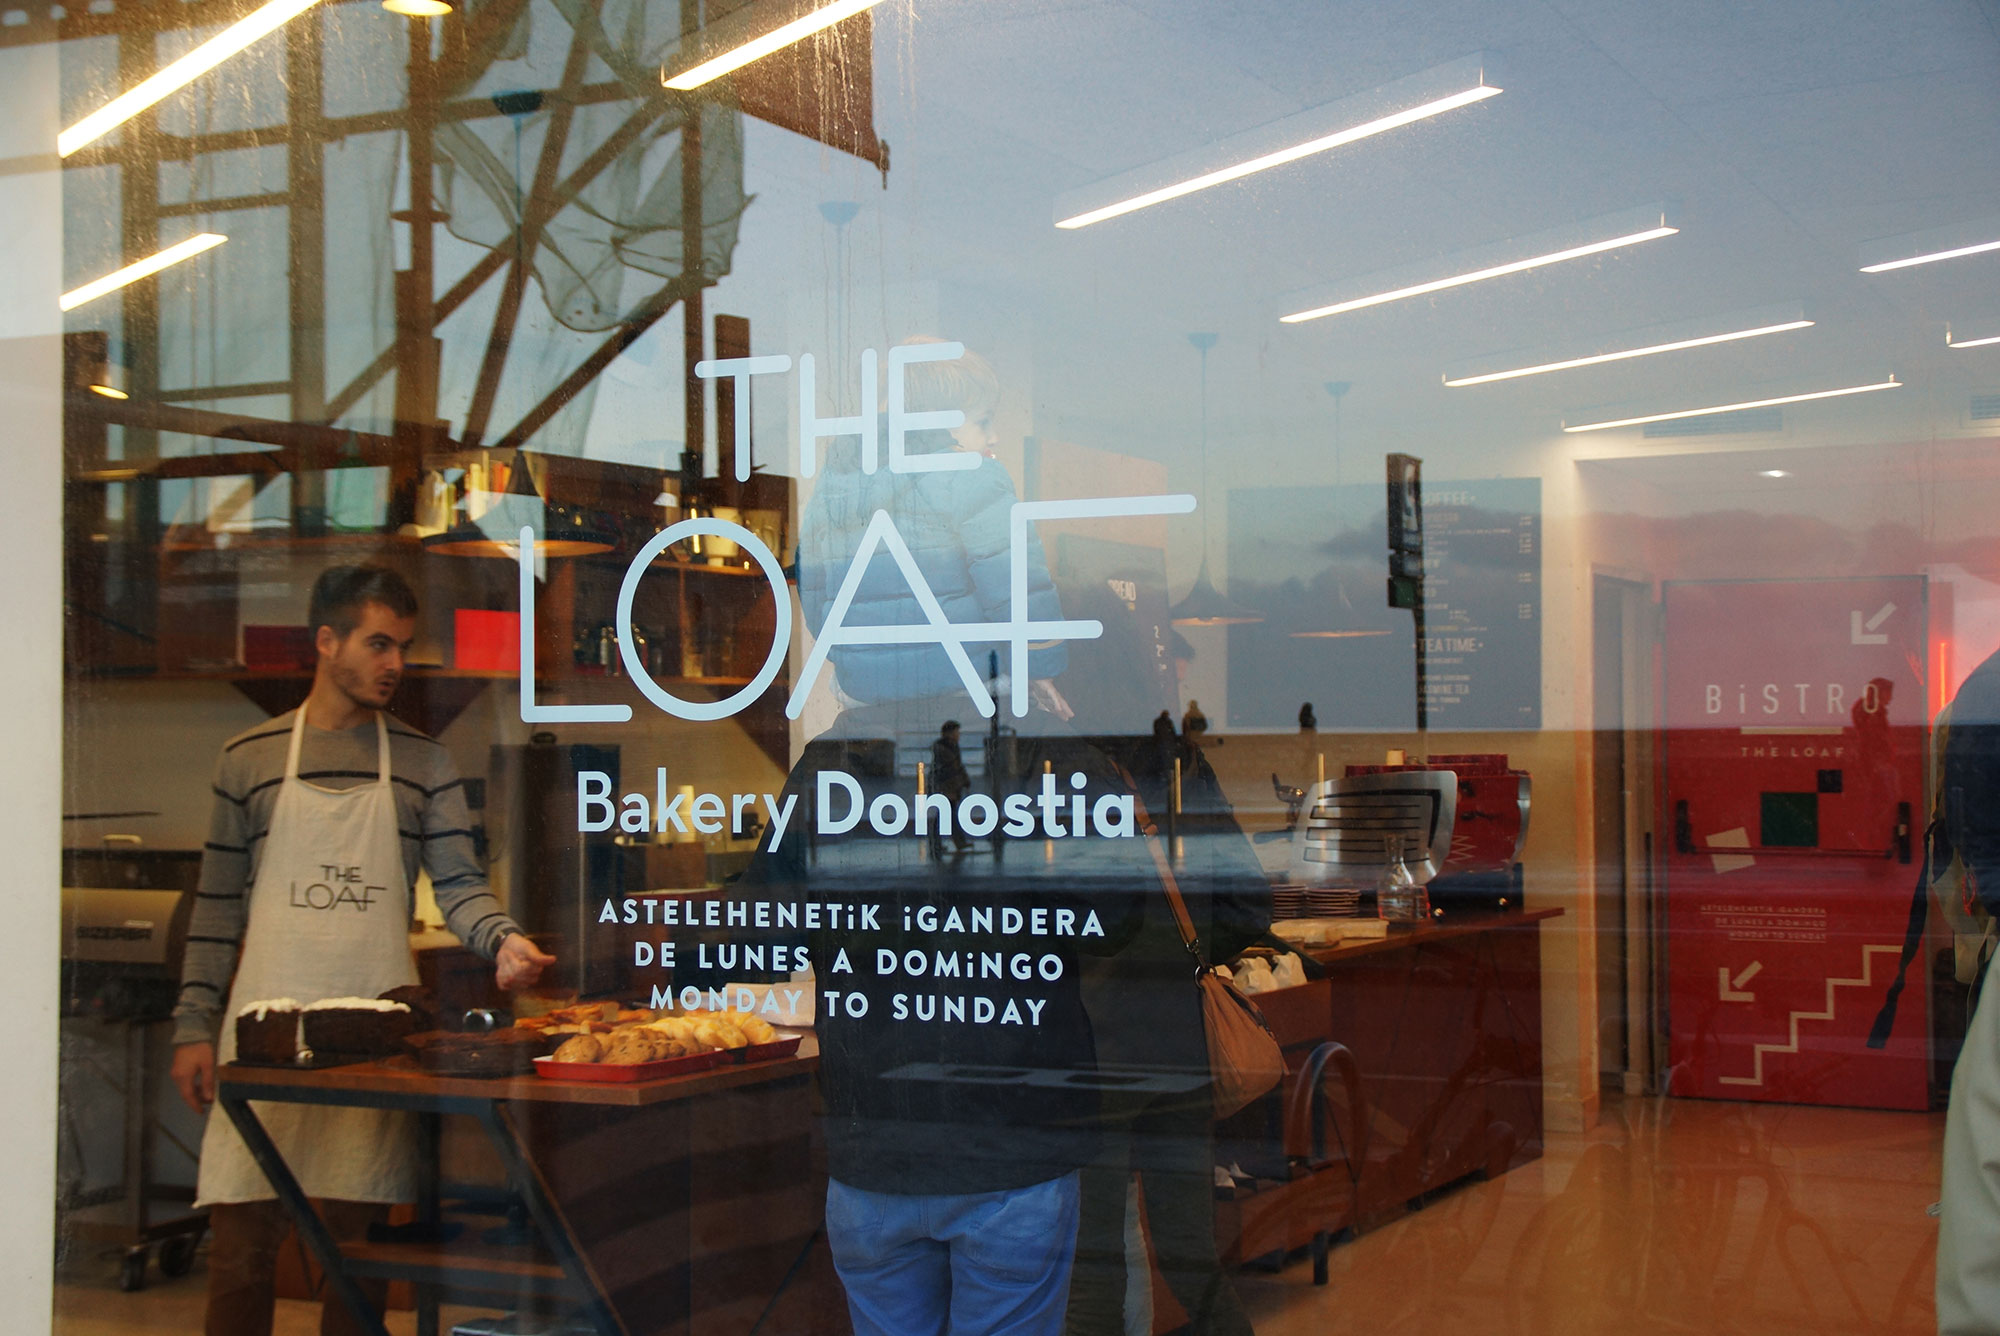 The Loaf Bakery Donostia